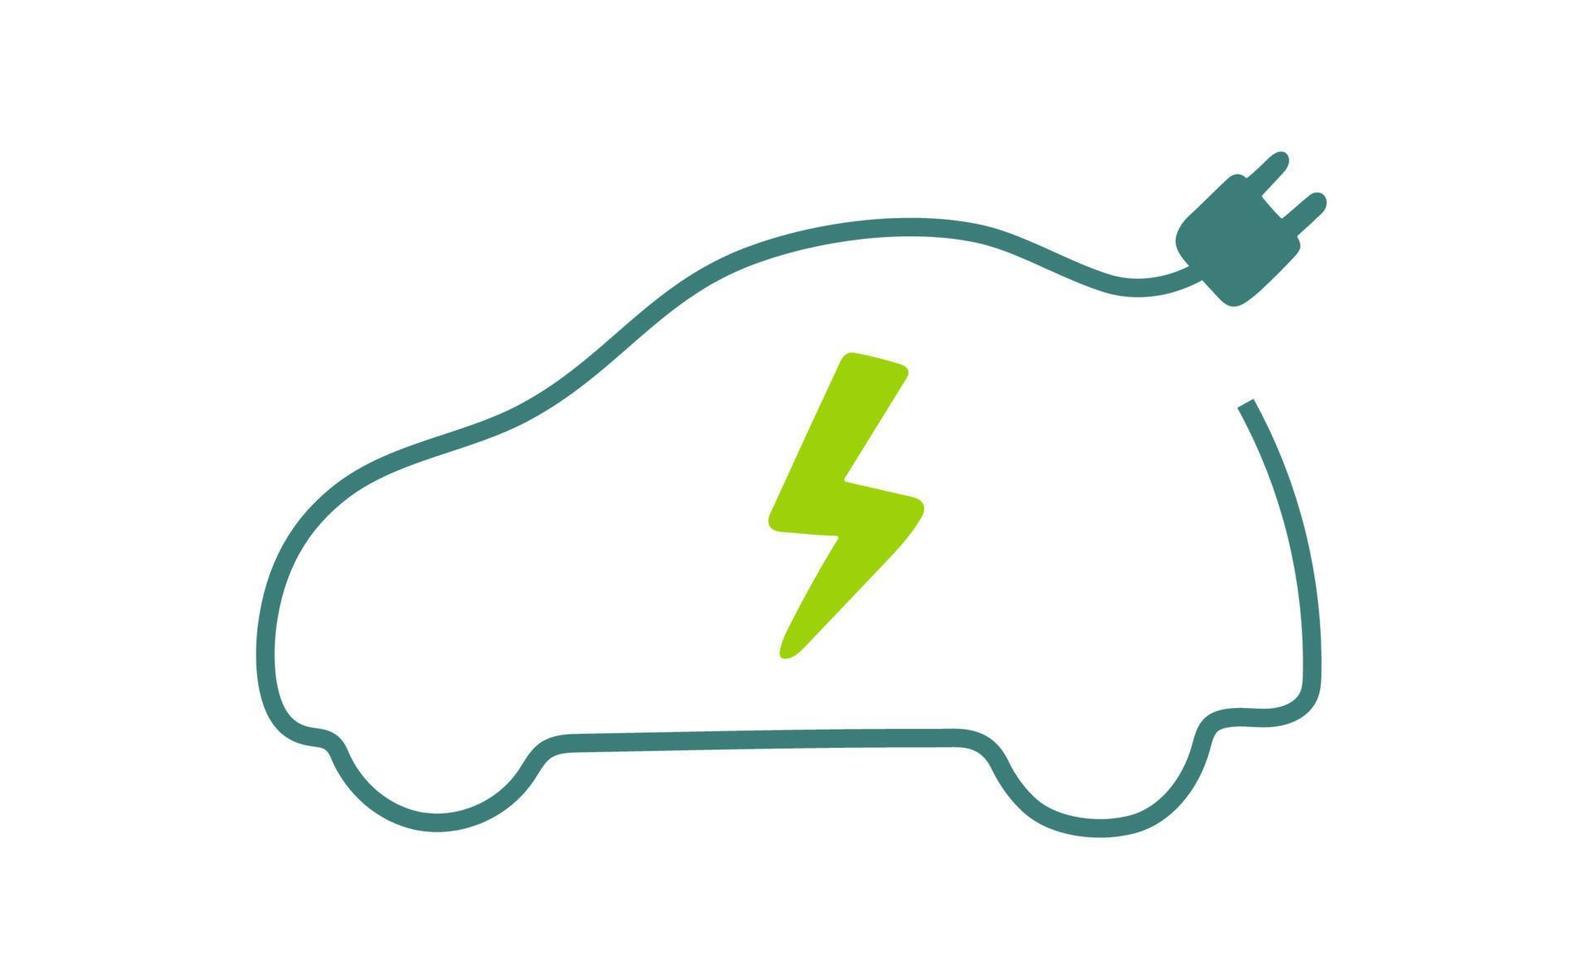 Electric car with plug icon symbol, EV car, Green hybrid vehicles charging point logotype, Eco friendly vehicle concept vector